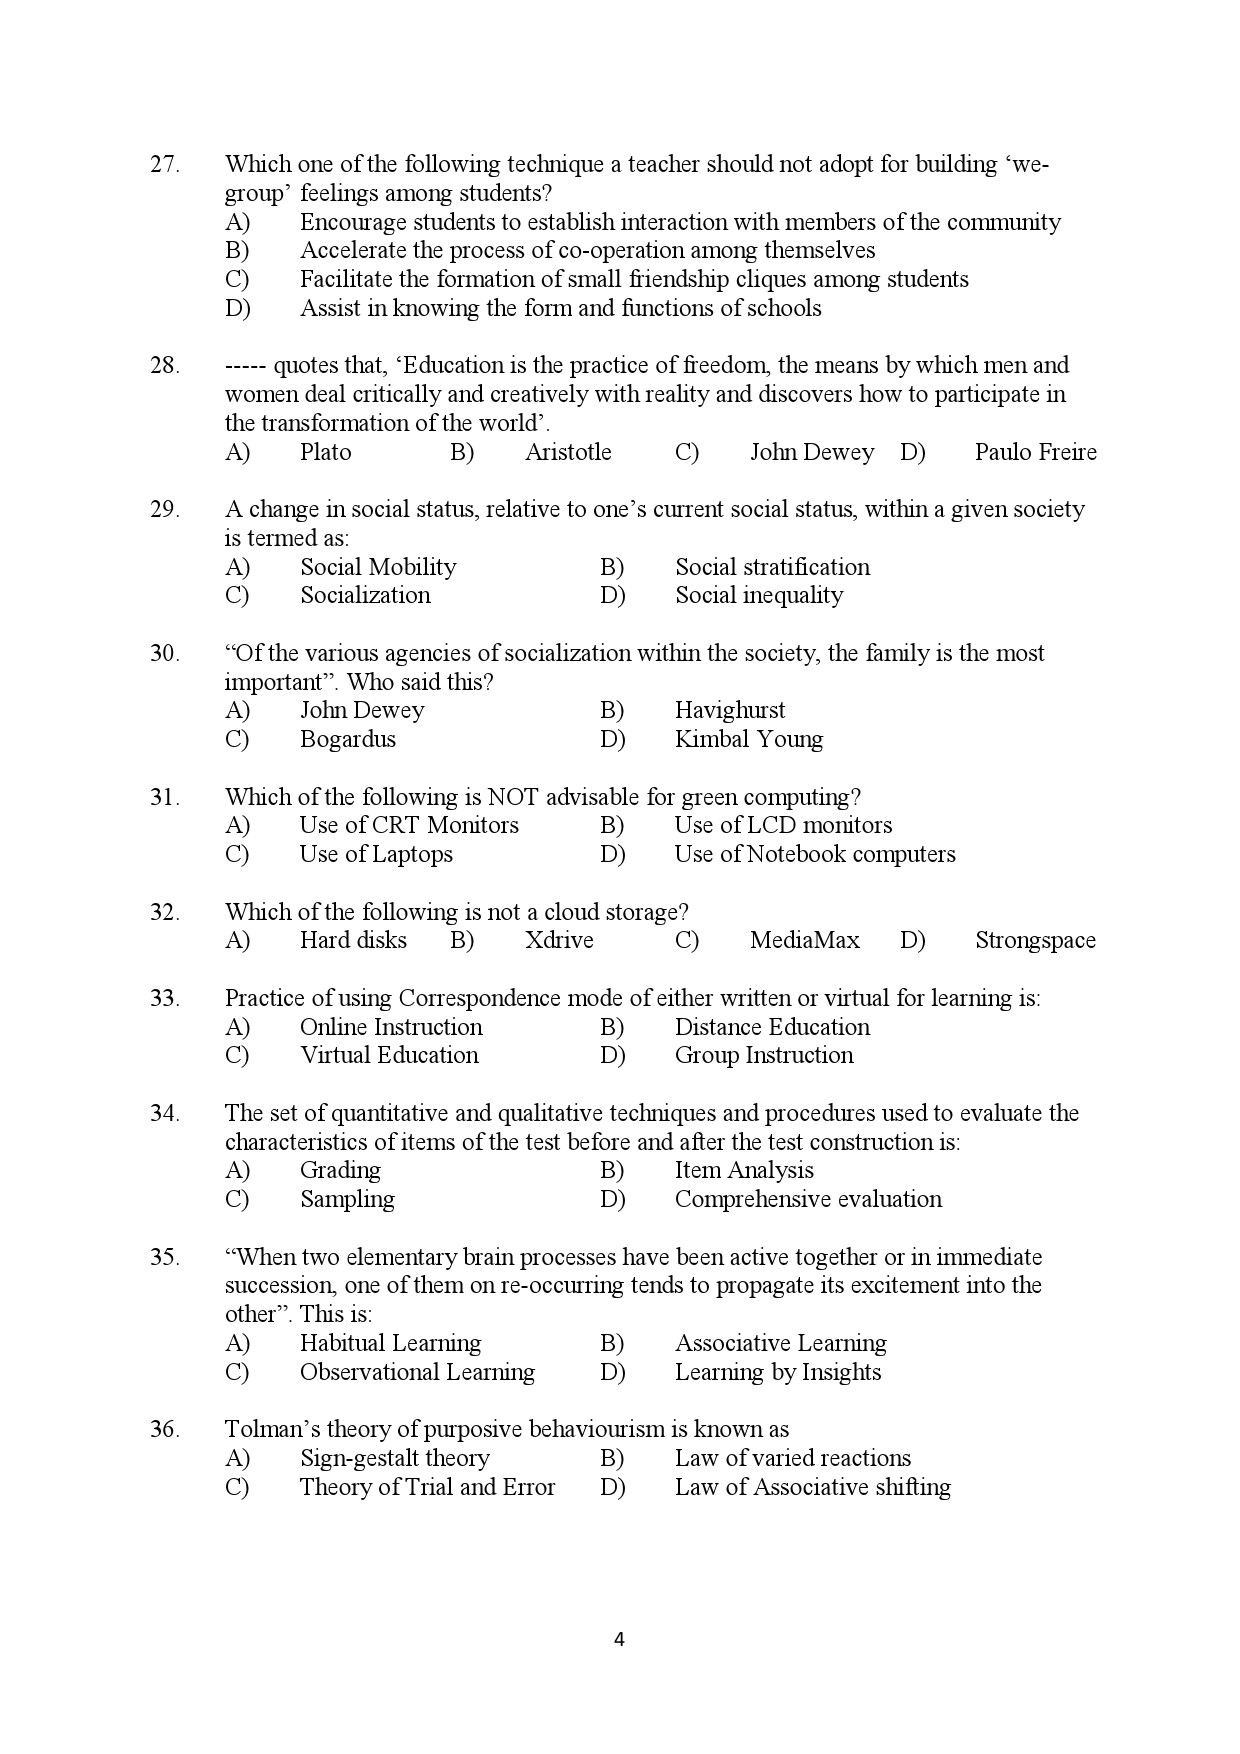 Kerala SET General Knowledge Exam Question Paper July 2018 4